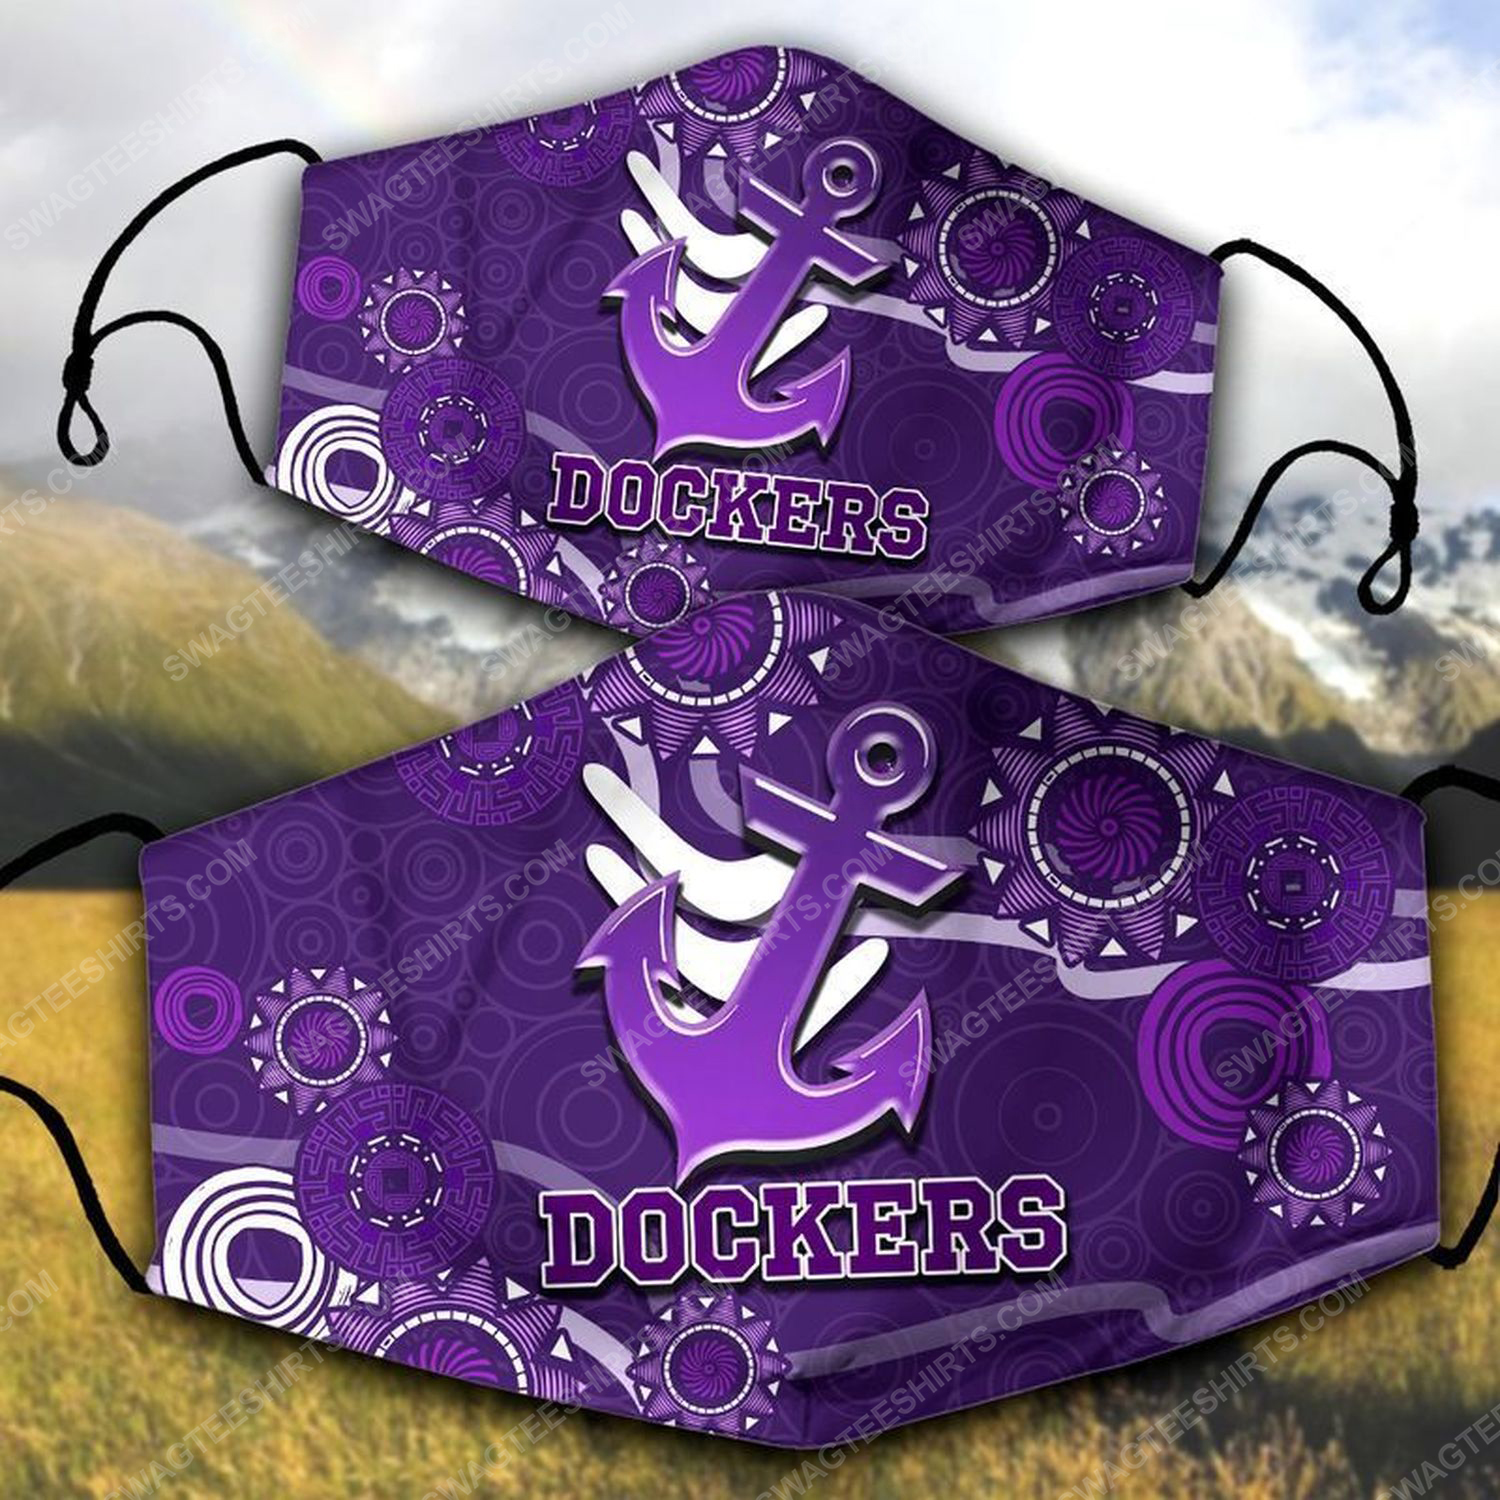 [special edition] Fremantle football club fremantle dockers face mask – maria